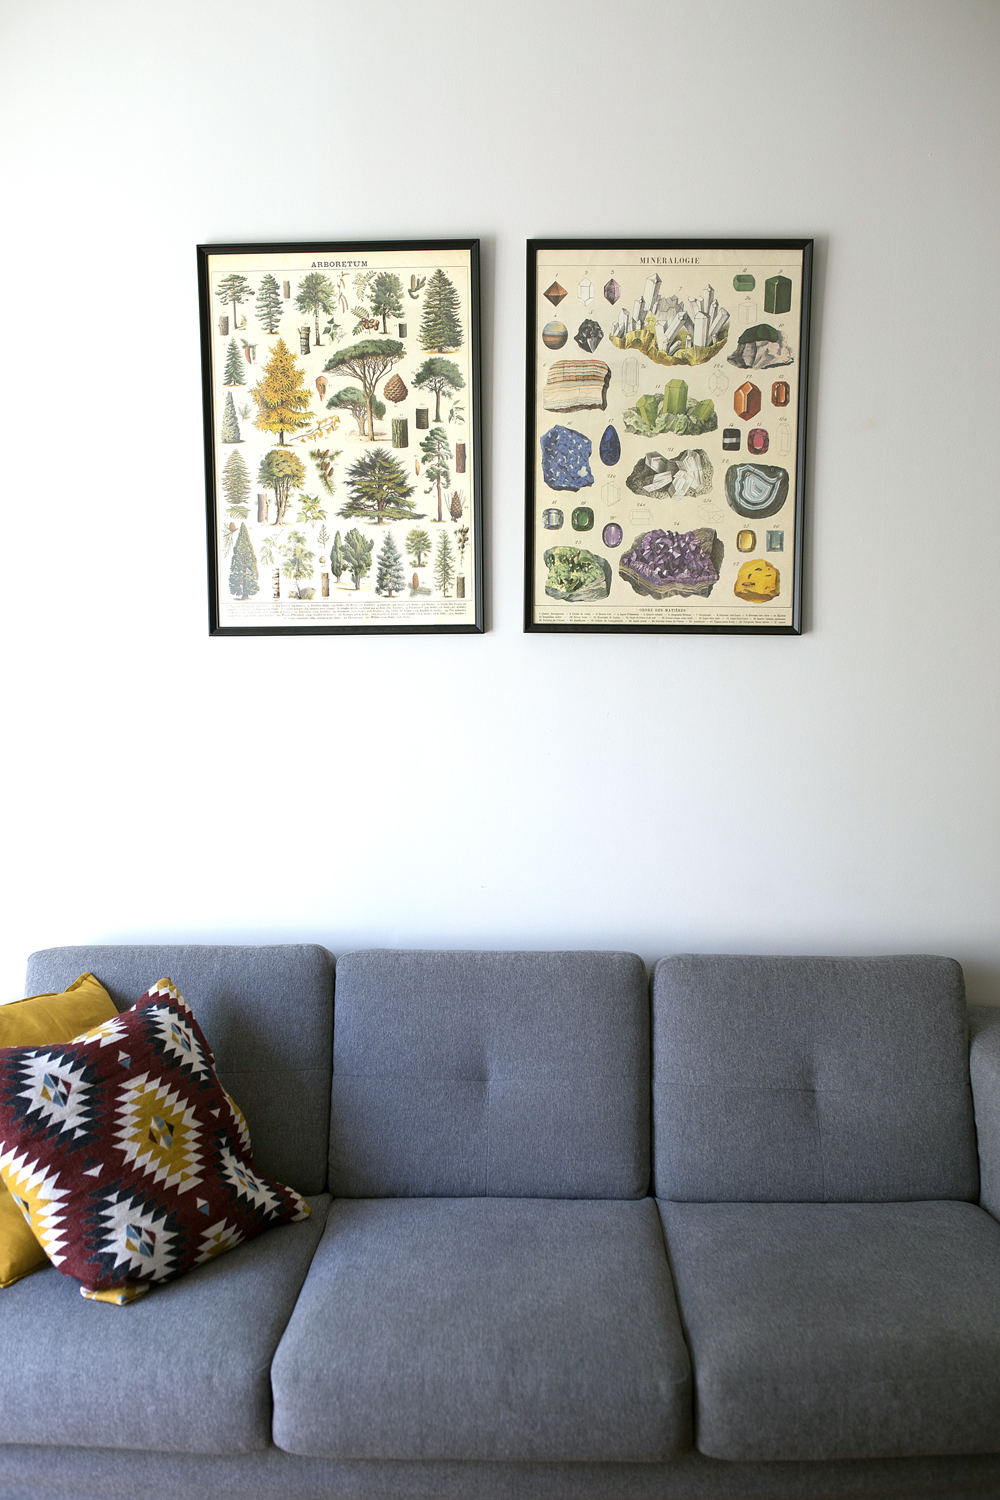 A grey mid-century modern couch with patterned throw pillows and art hanging on the wall above